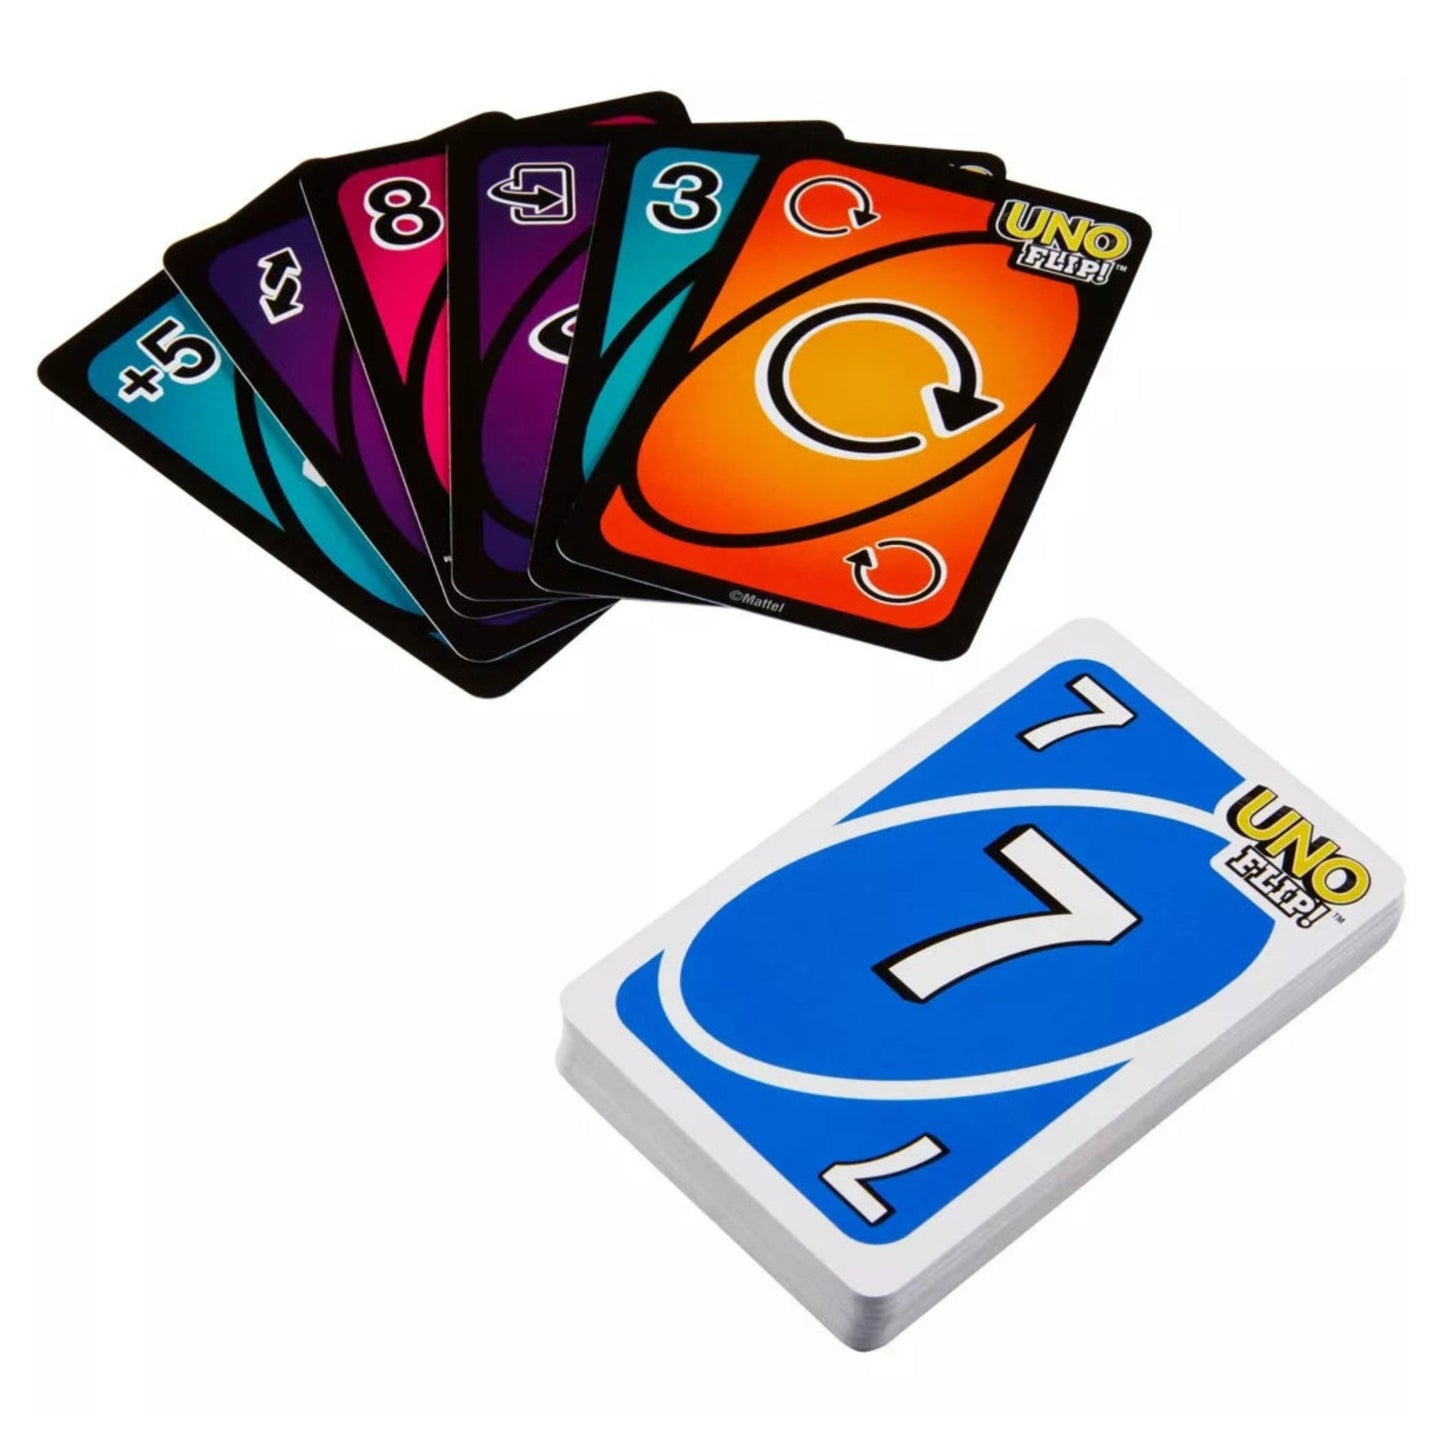 UNO FLIP! Double Sided Card Game for 2-10 Players